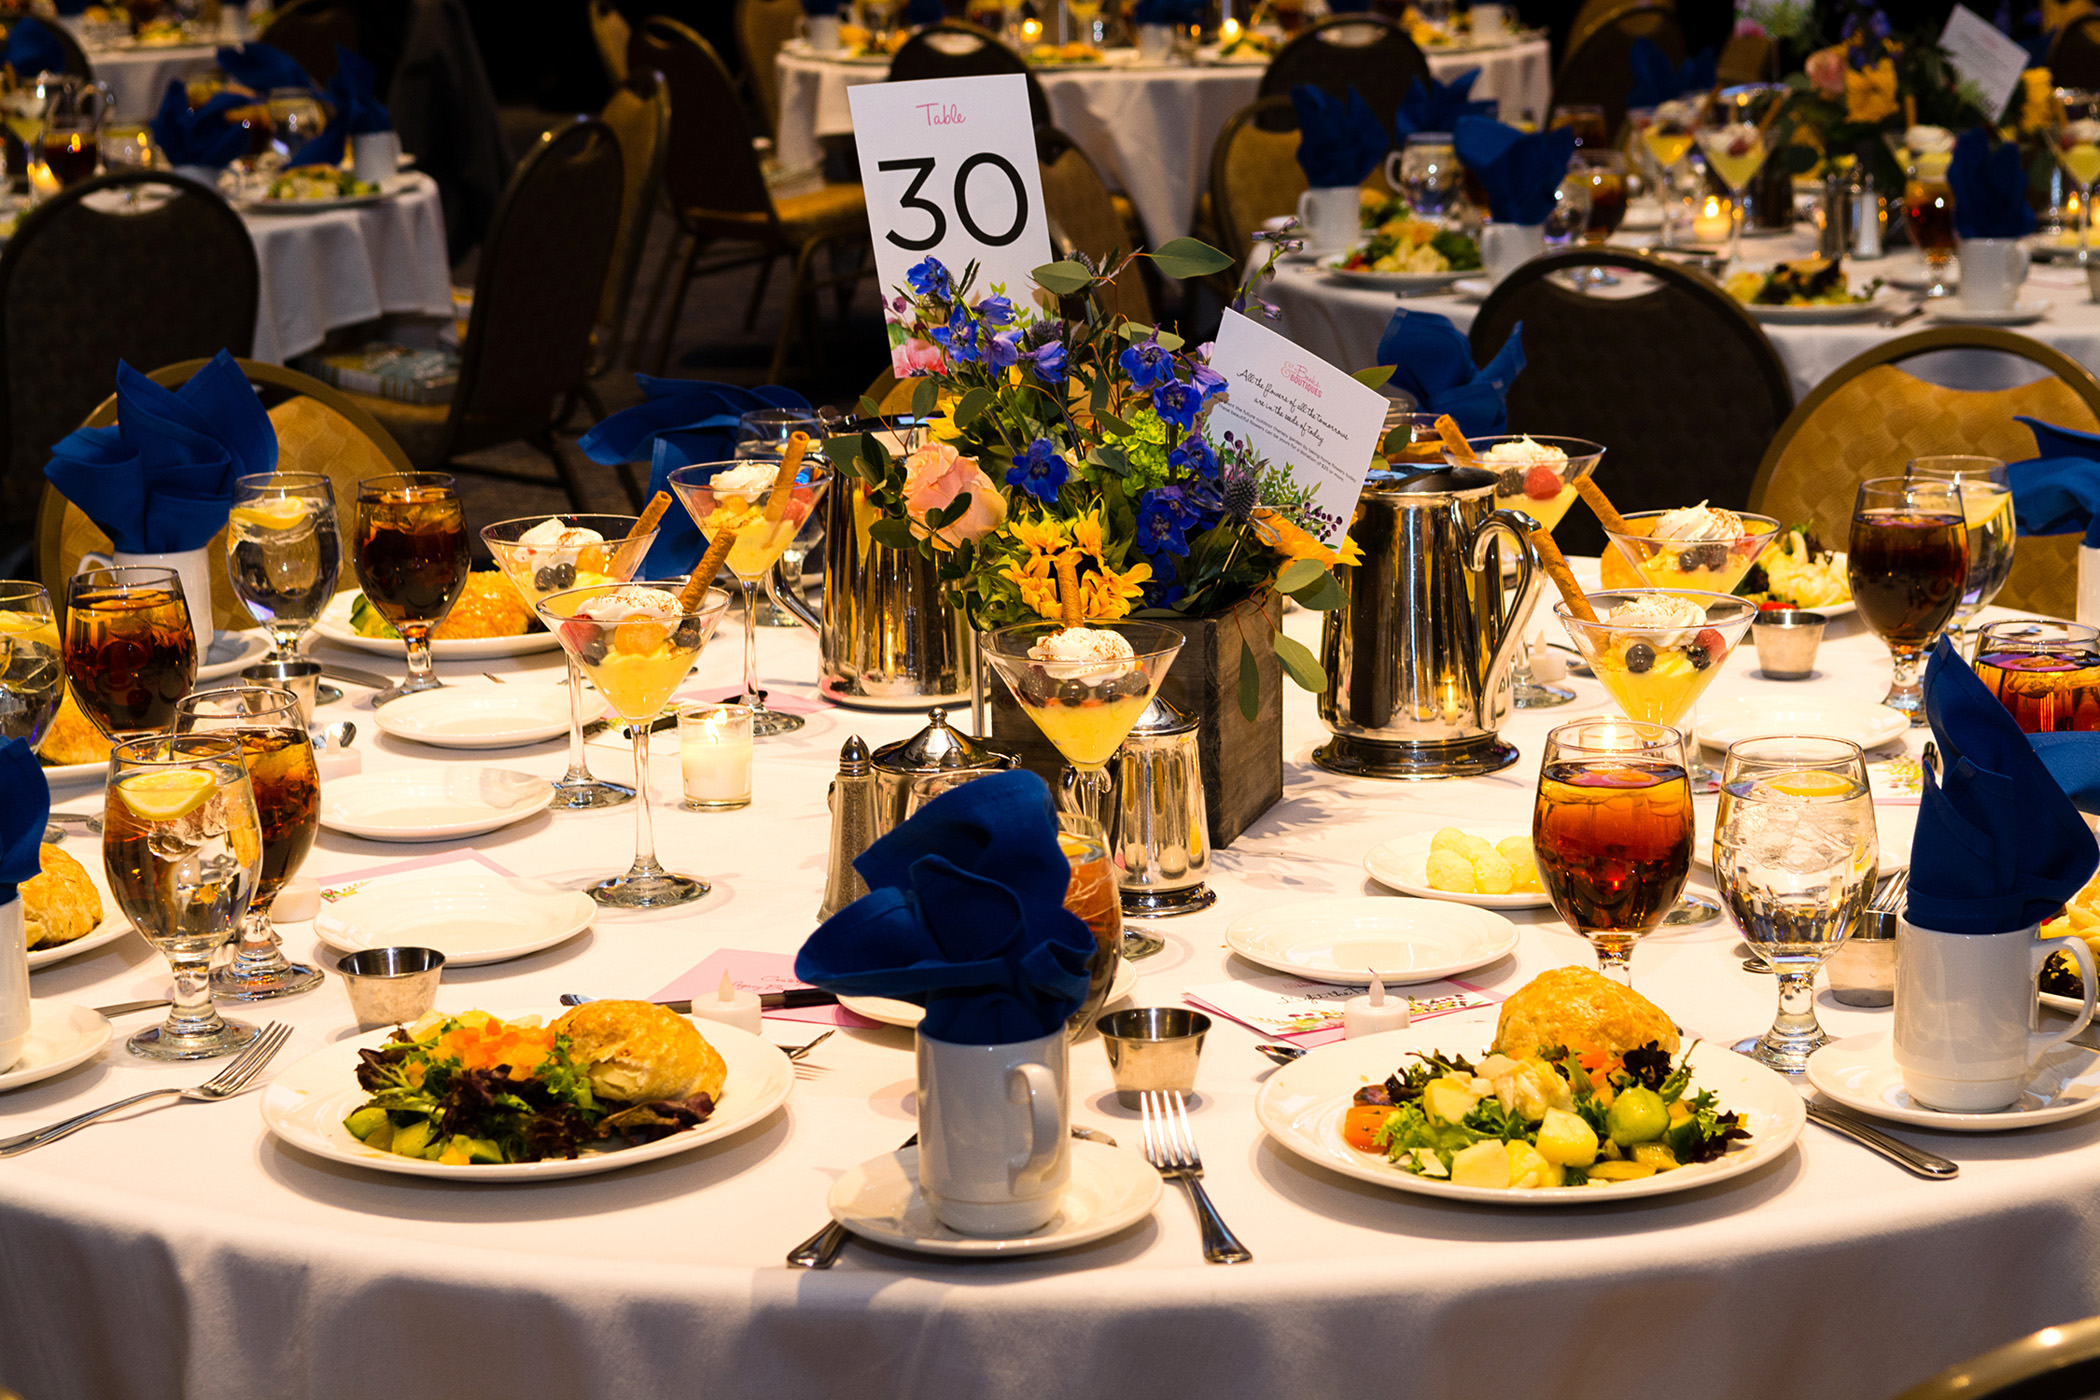 Tables with flowers and blue accents with food and drinks for the guests of the 2018 Books and Boutique 